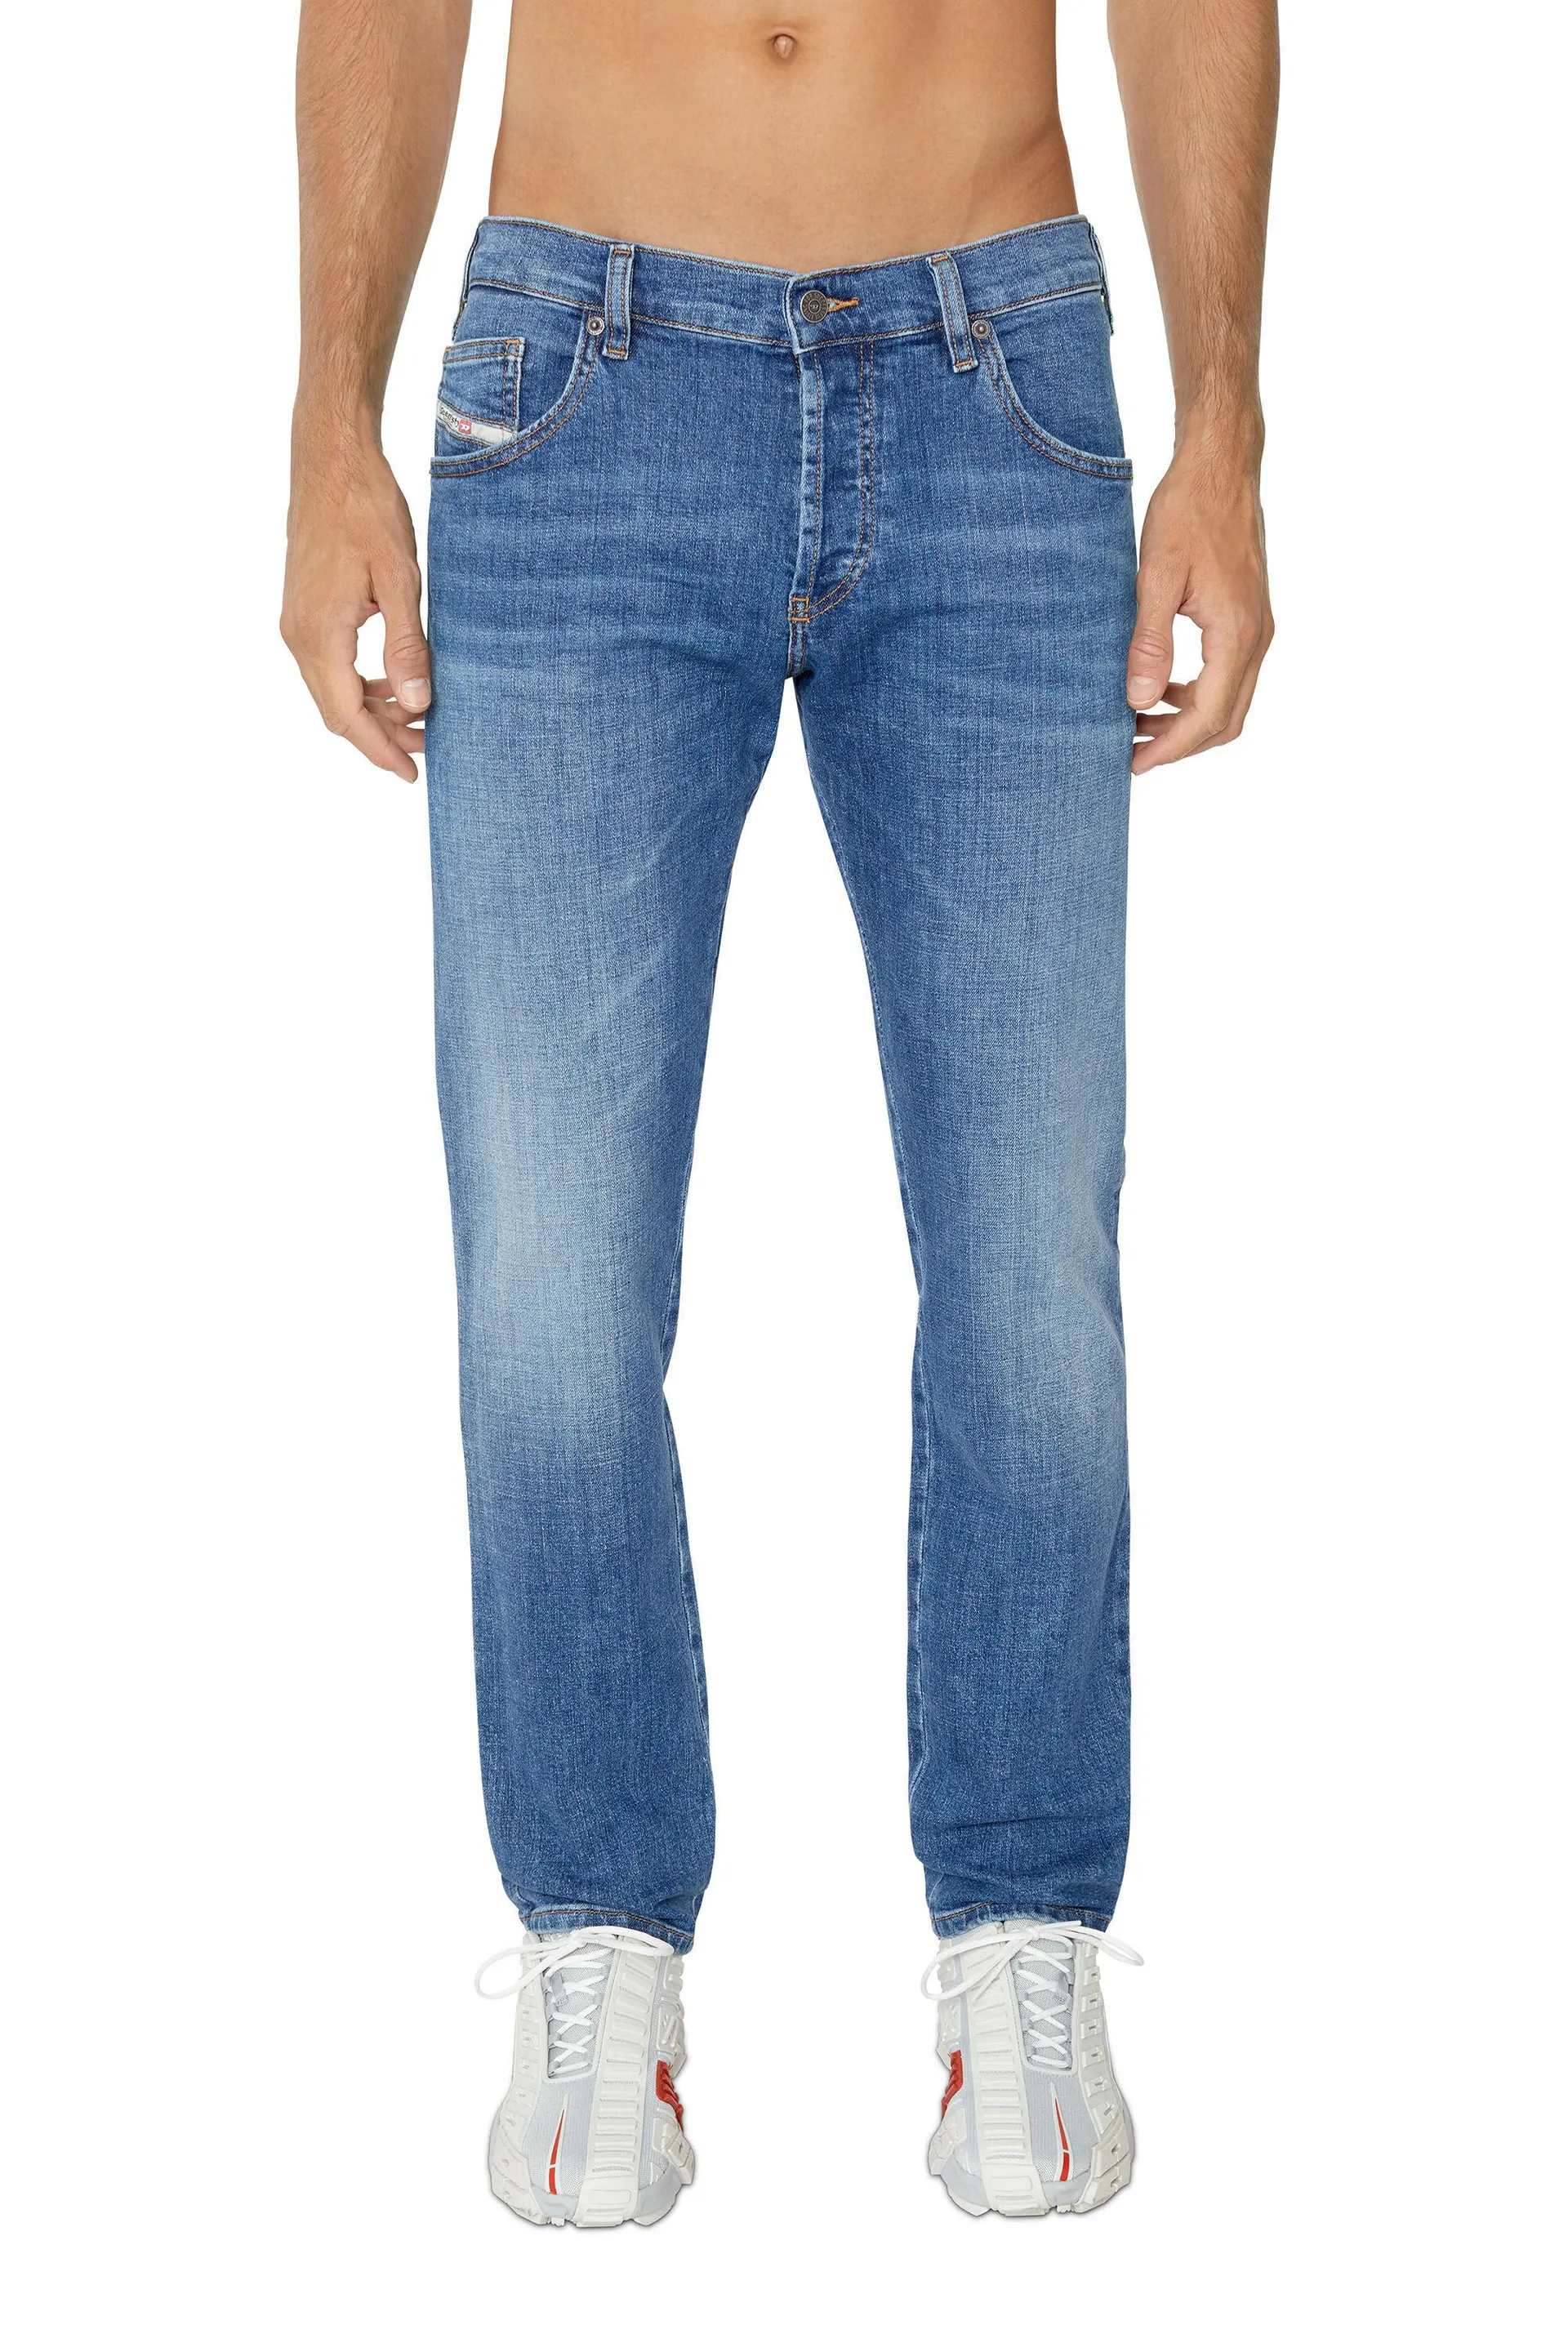 d-yennox 0ihat tapered jeans